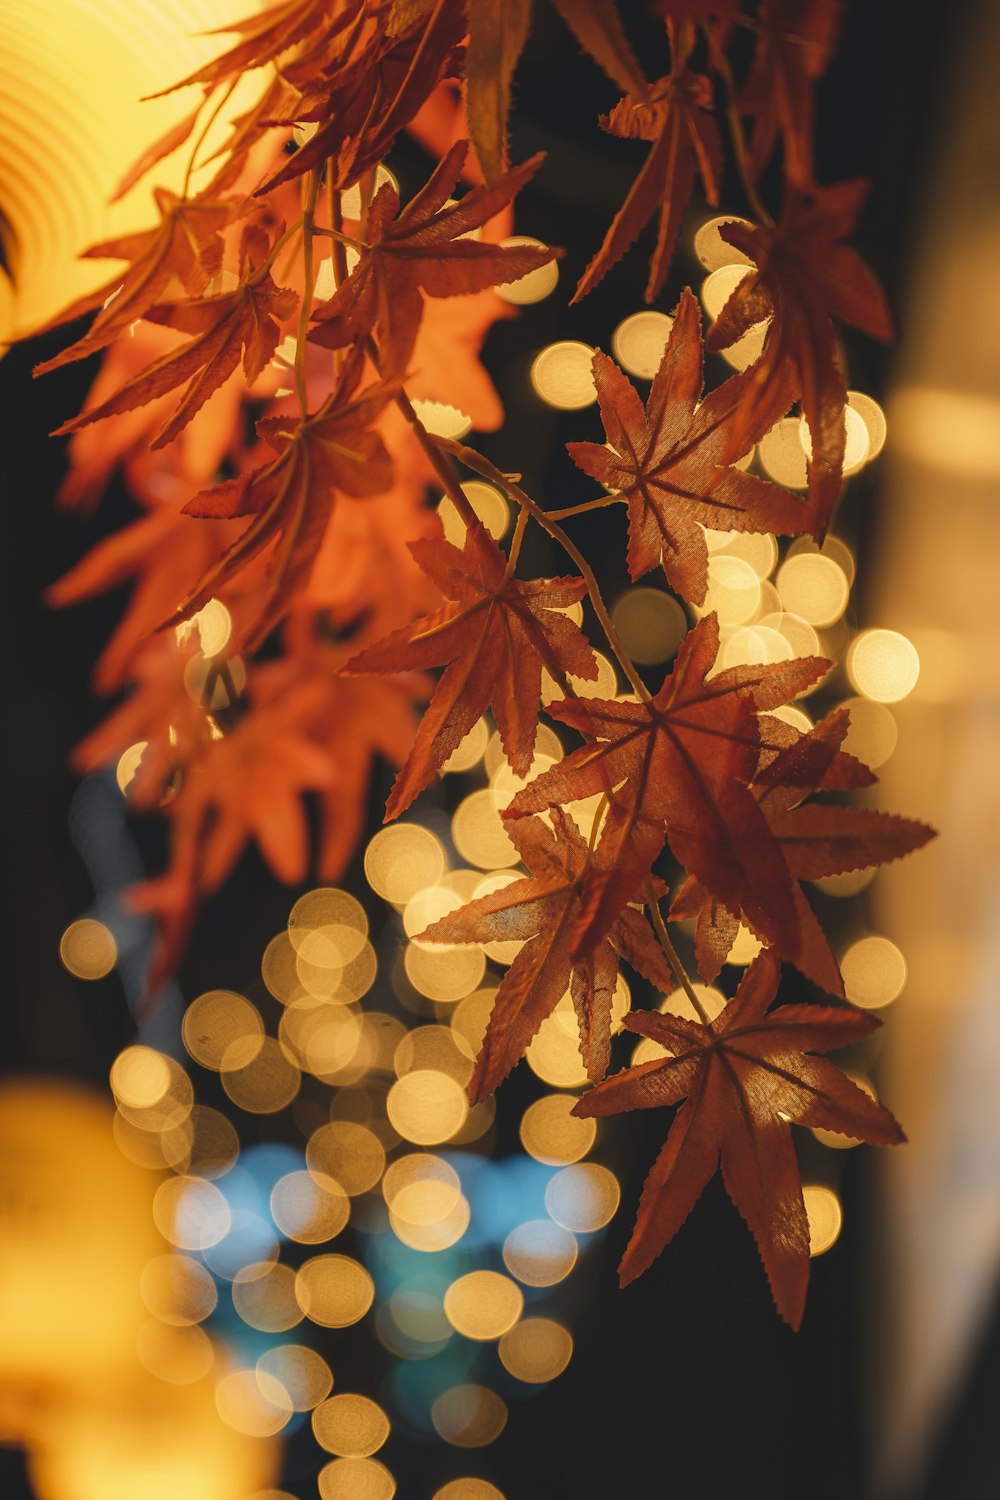 a close up of a leafy plant with blurry lights in the background